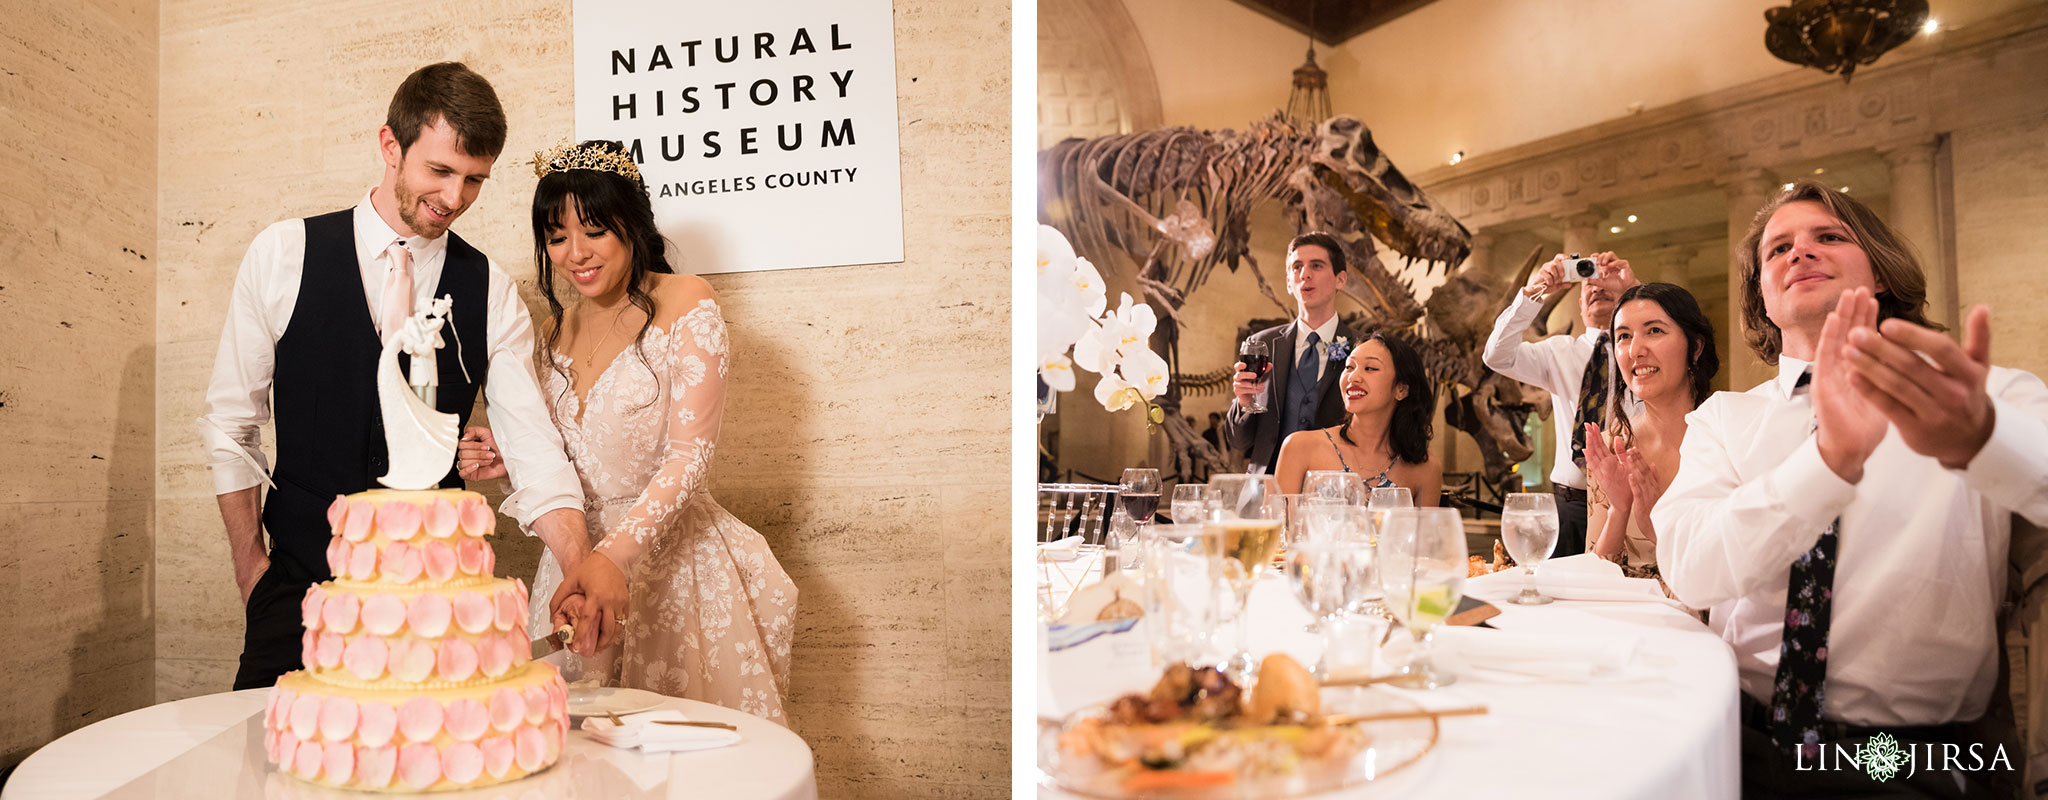 28 los angeles natural history museum wedding photography